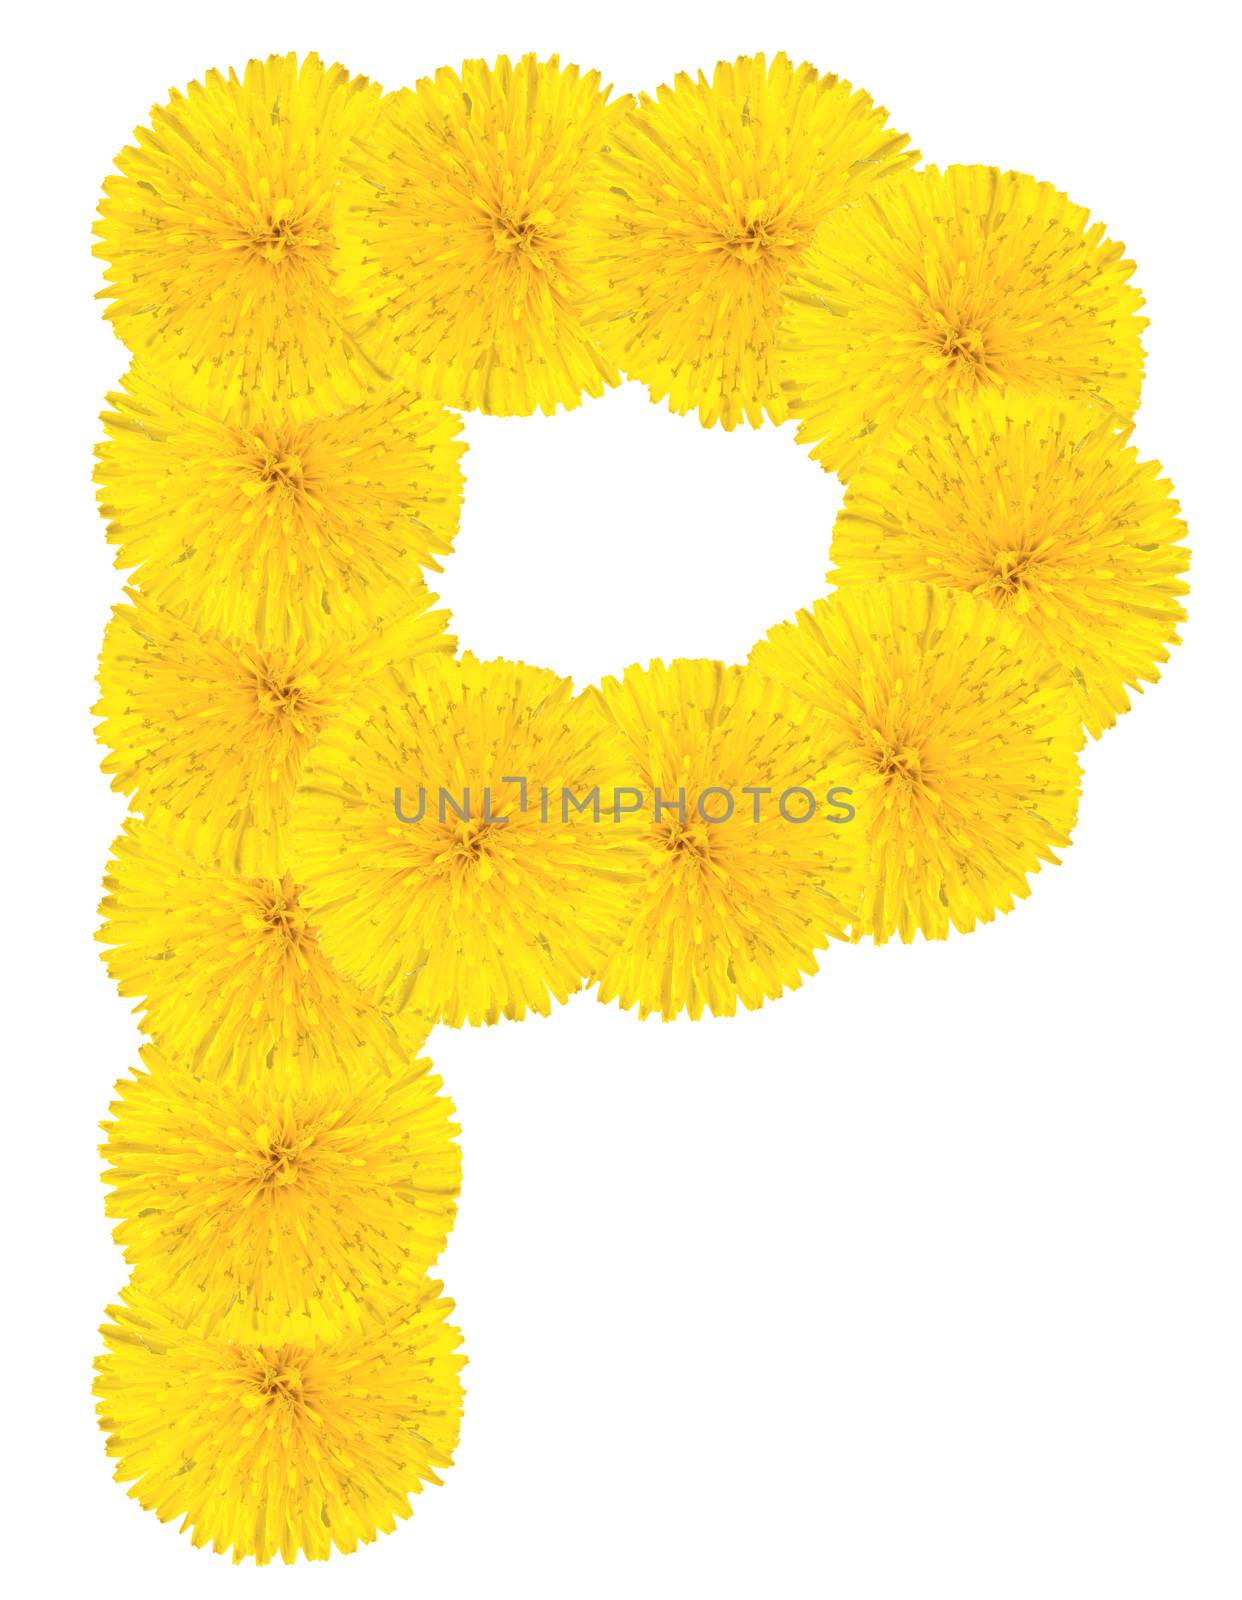 Letter P made from dandelions by Valengilda